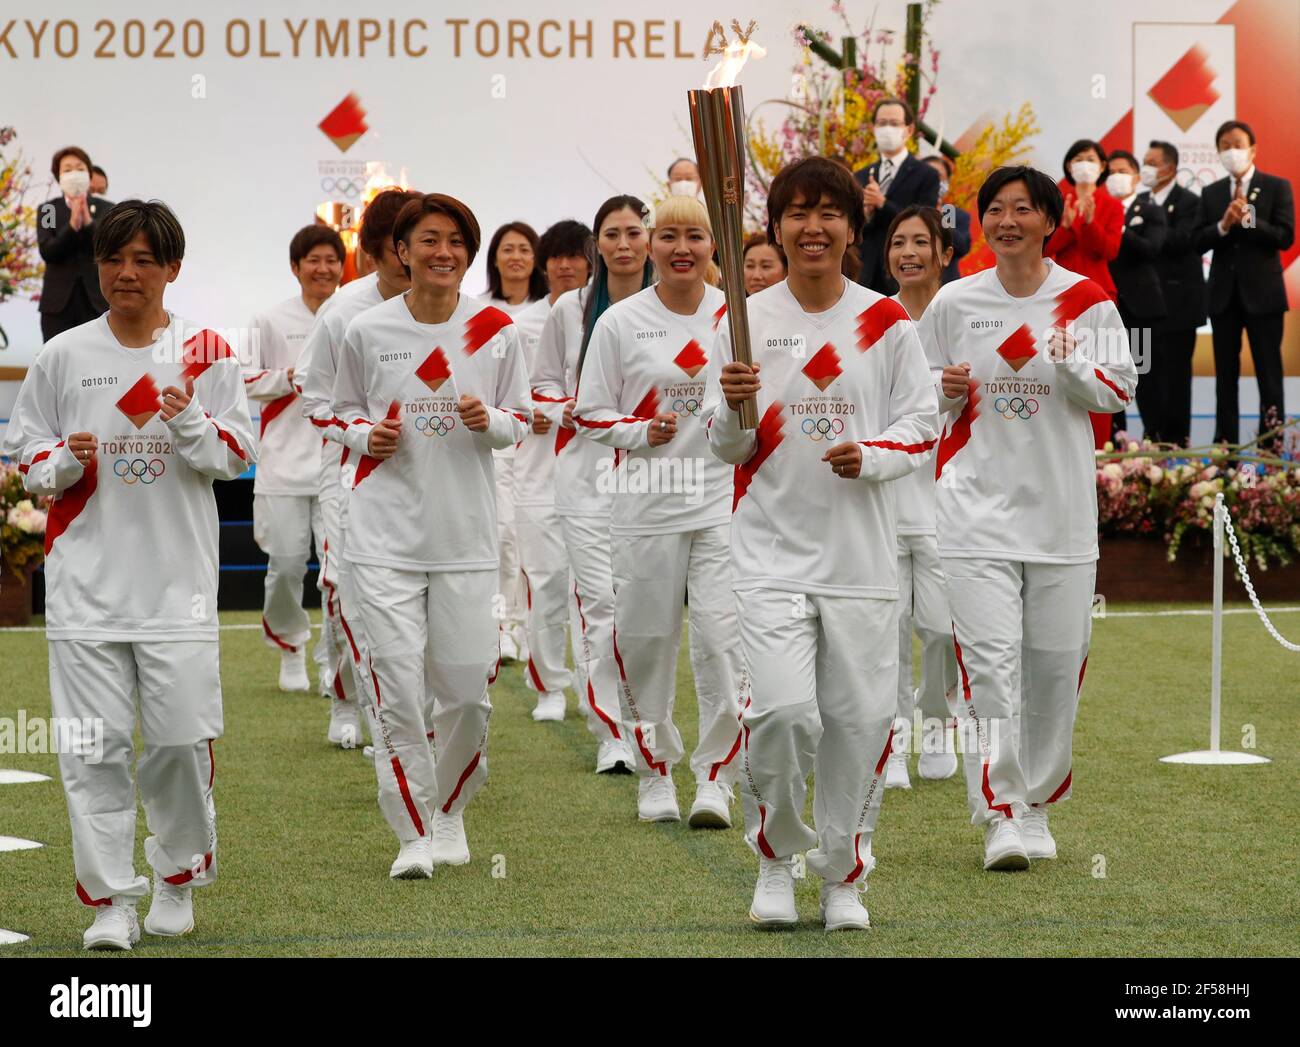 FUKUSHIMA, March 25, 2021  Former members of 'Nadeshiko Japan,' the Japan women's National Football Team, run as torchbearers on the first day of the Tokyo 2020 Olympic torch relay at J-Village National Training Center in Futaba, Fukushima of Japan, on March 25, 2021. (Kim Kyung-Hoon/Pool via Xinhua) Stock Photo